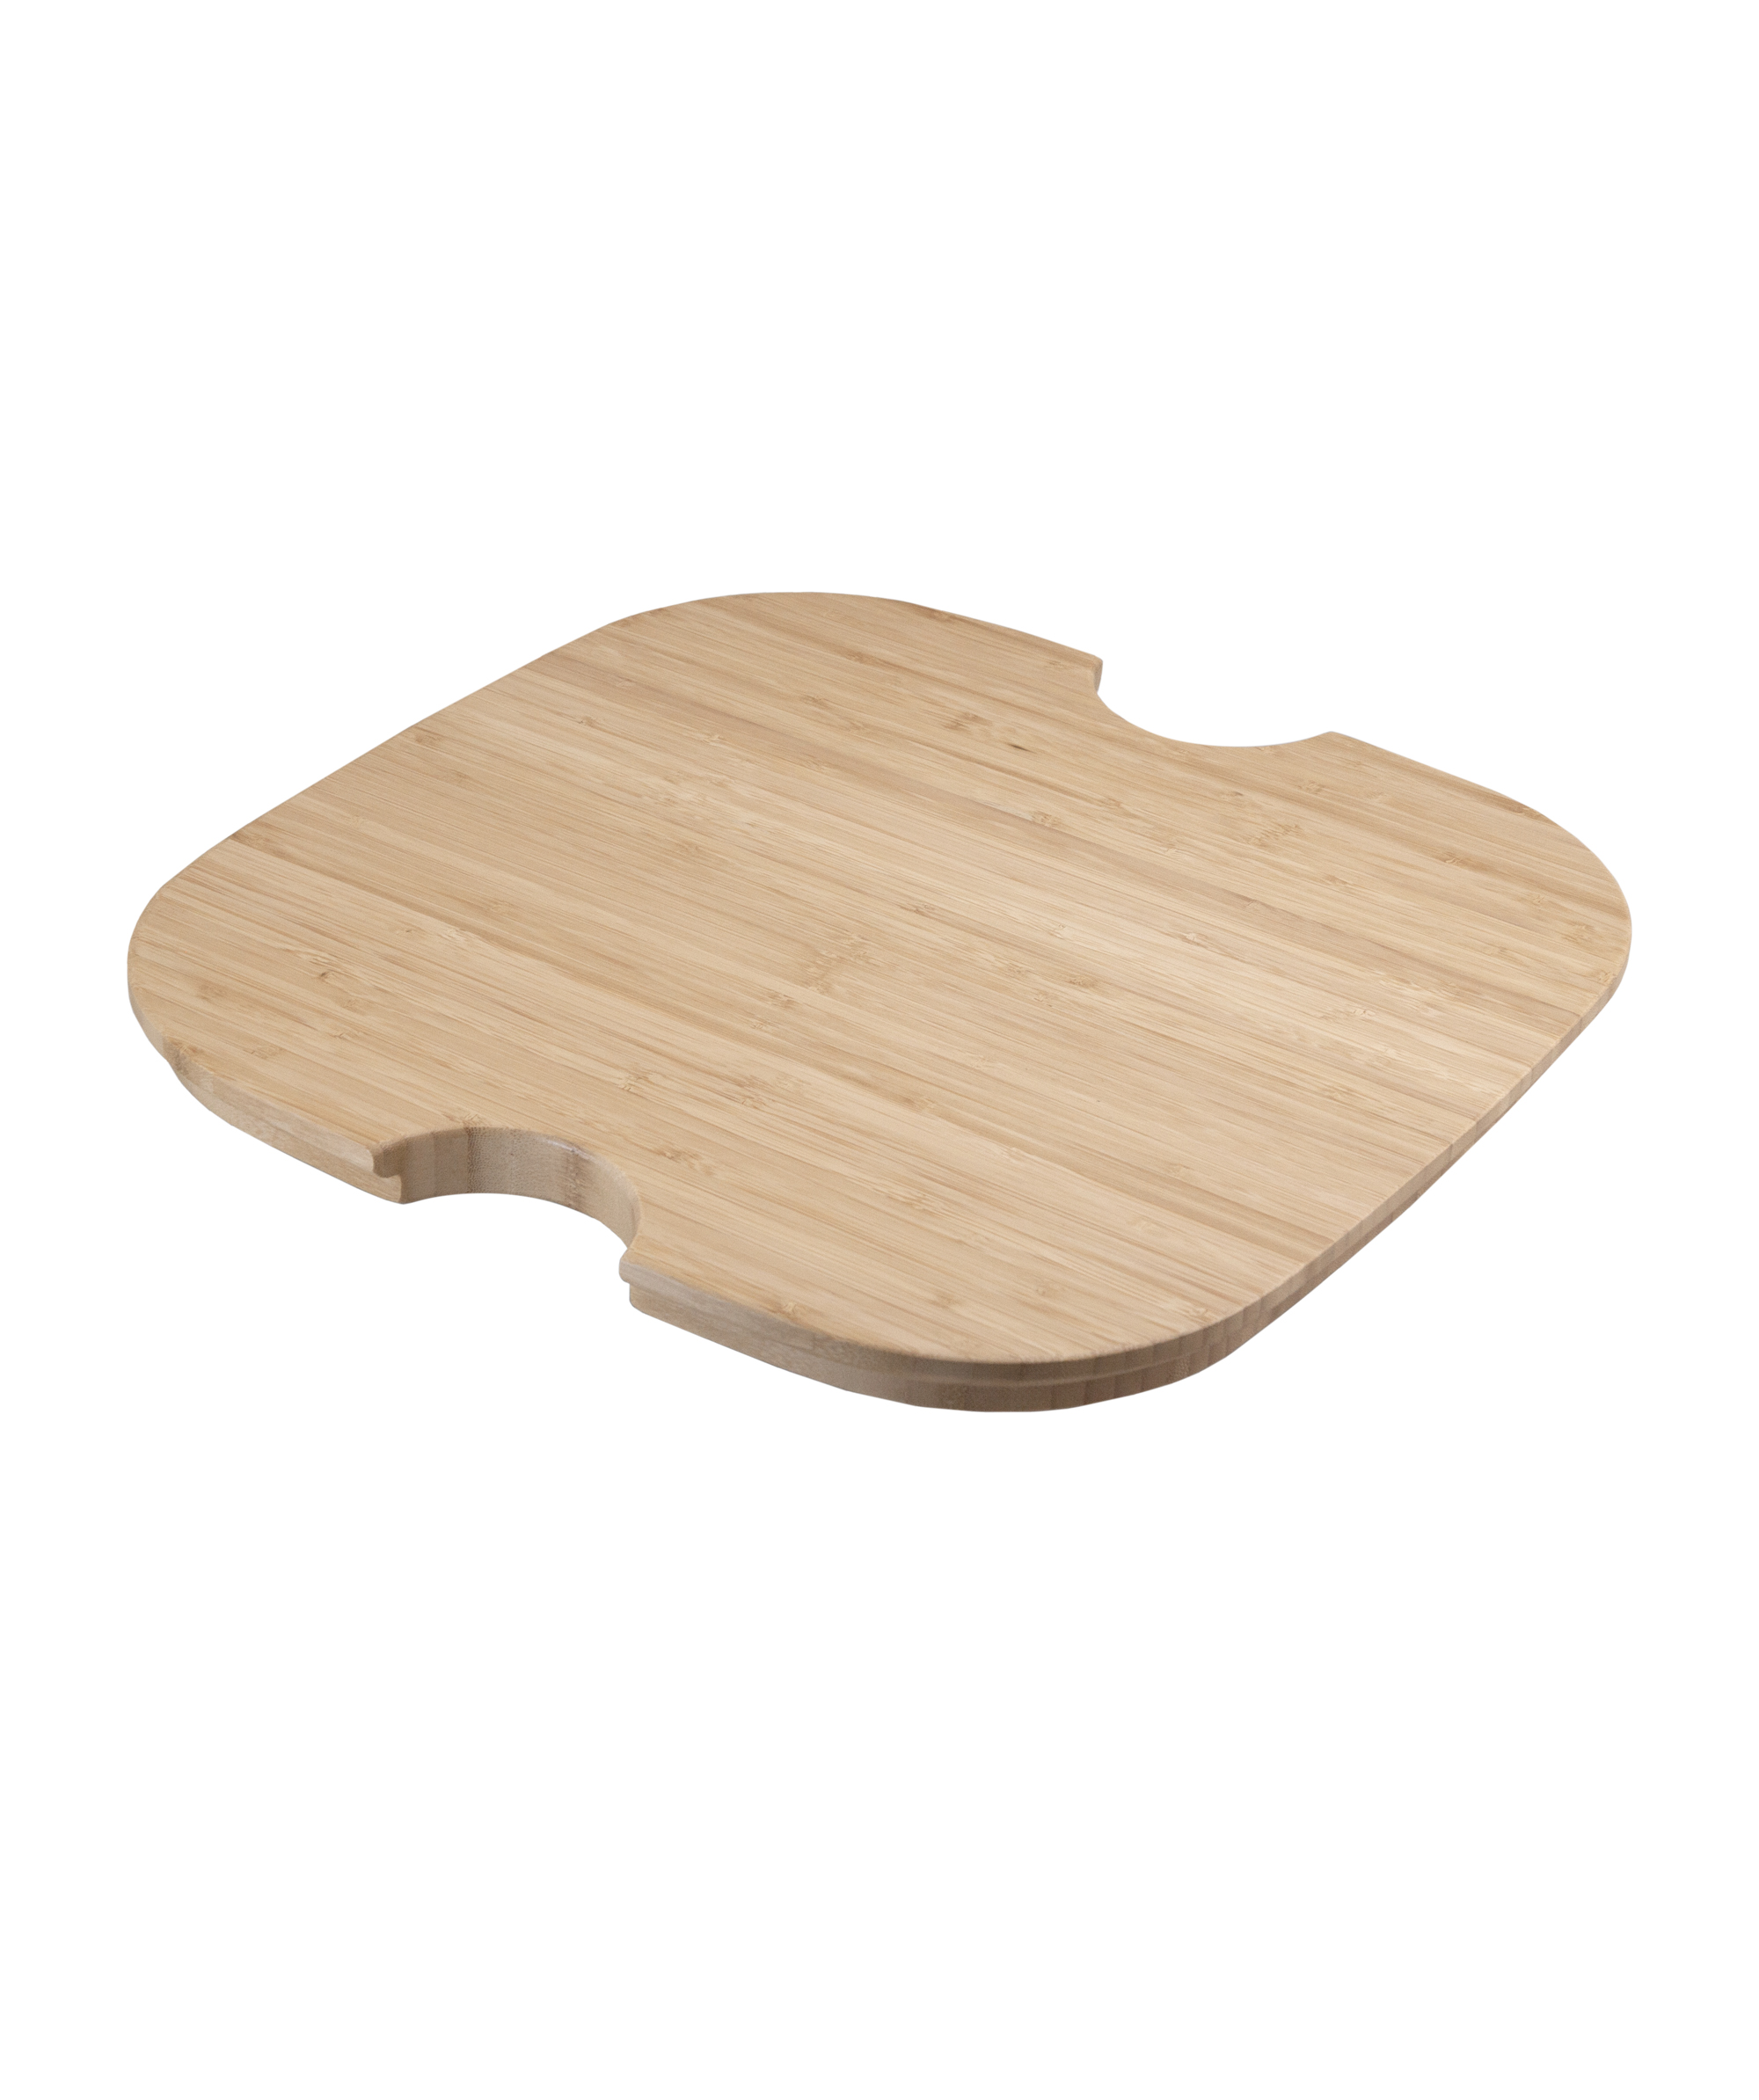 Cutting Board 07 - for Acero 860  stainless steel sink